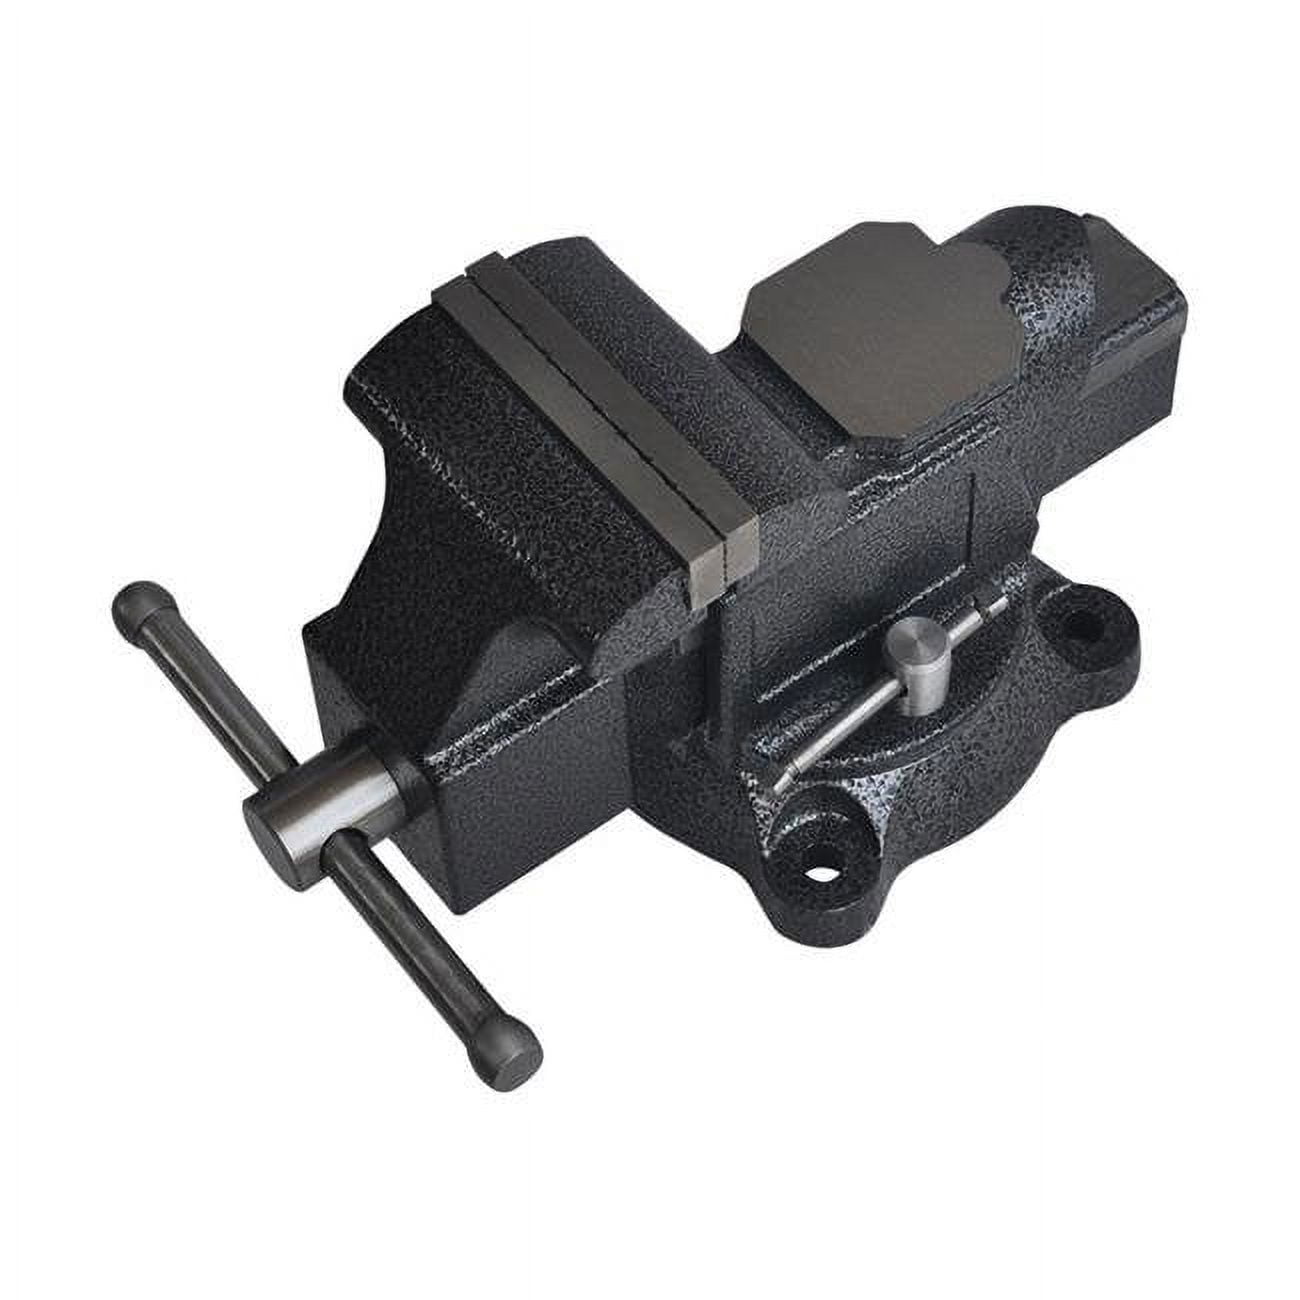 2796852 4 In. Forged Steel Bench Vise With Swivel Base, Black